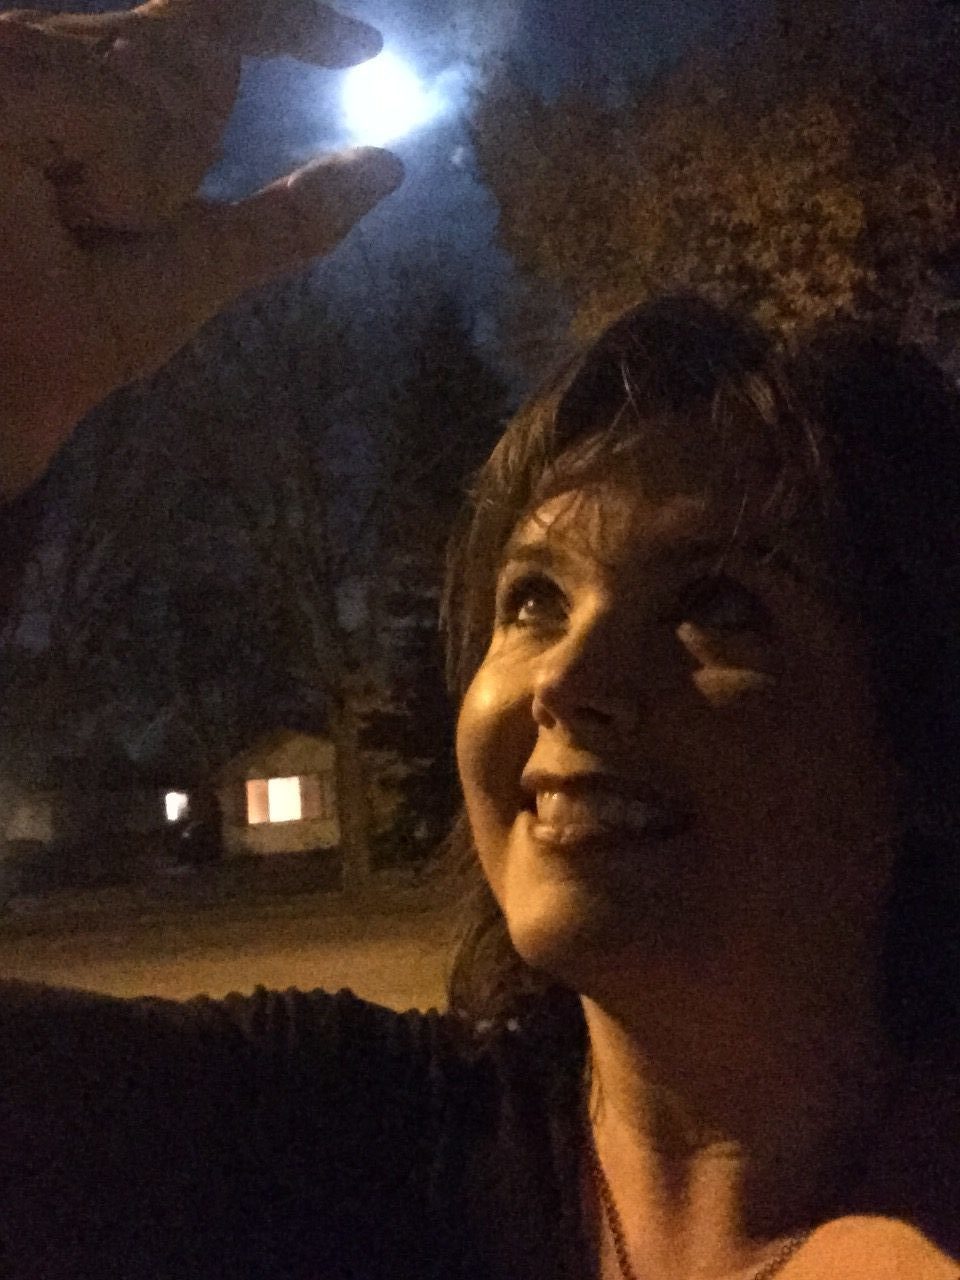 Angie Holding The Moon Humanly Branding And Marketing 